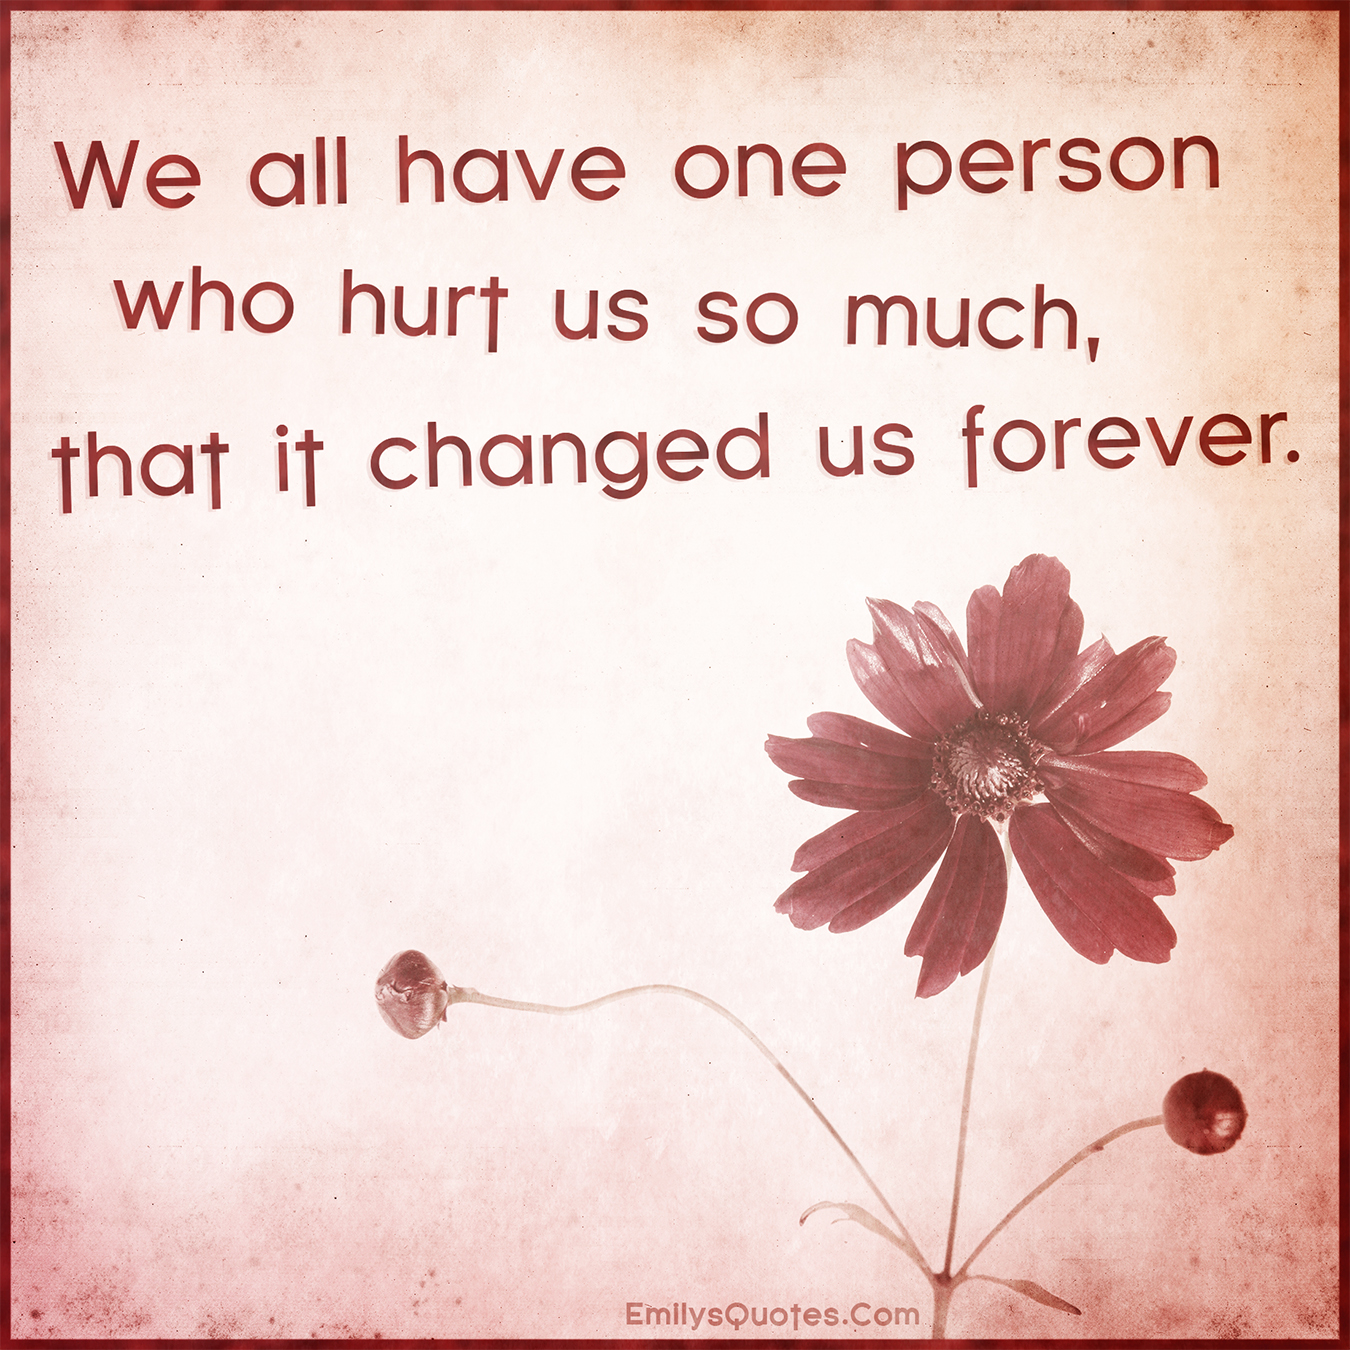 We all have one person who hurt us so much, that it changed us forever